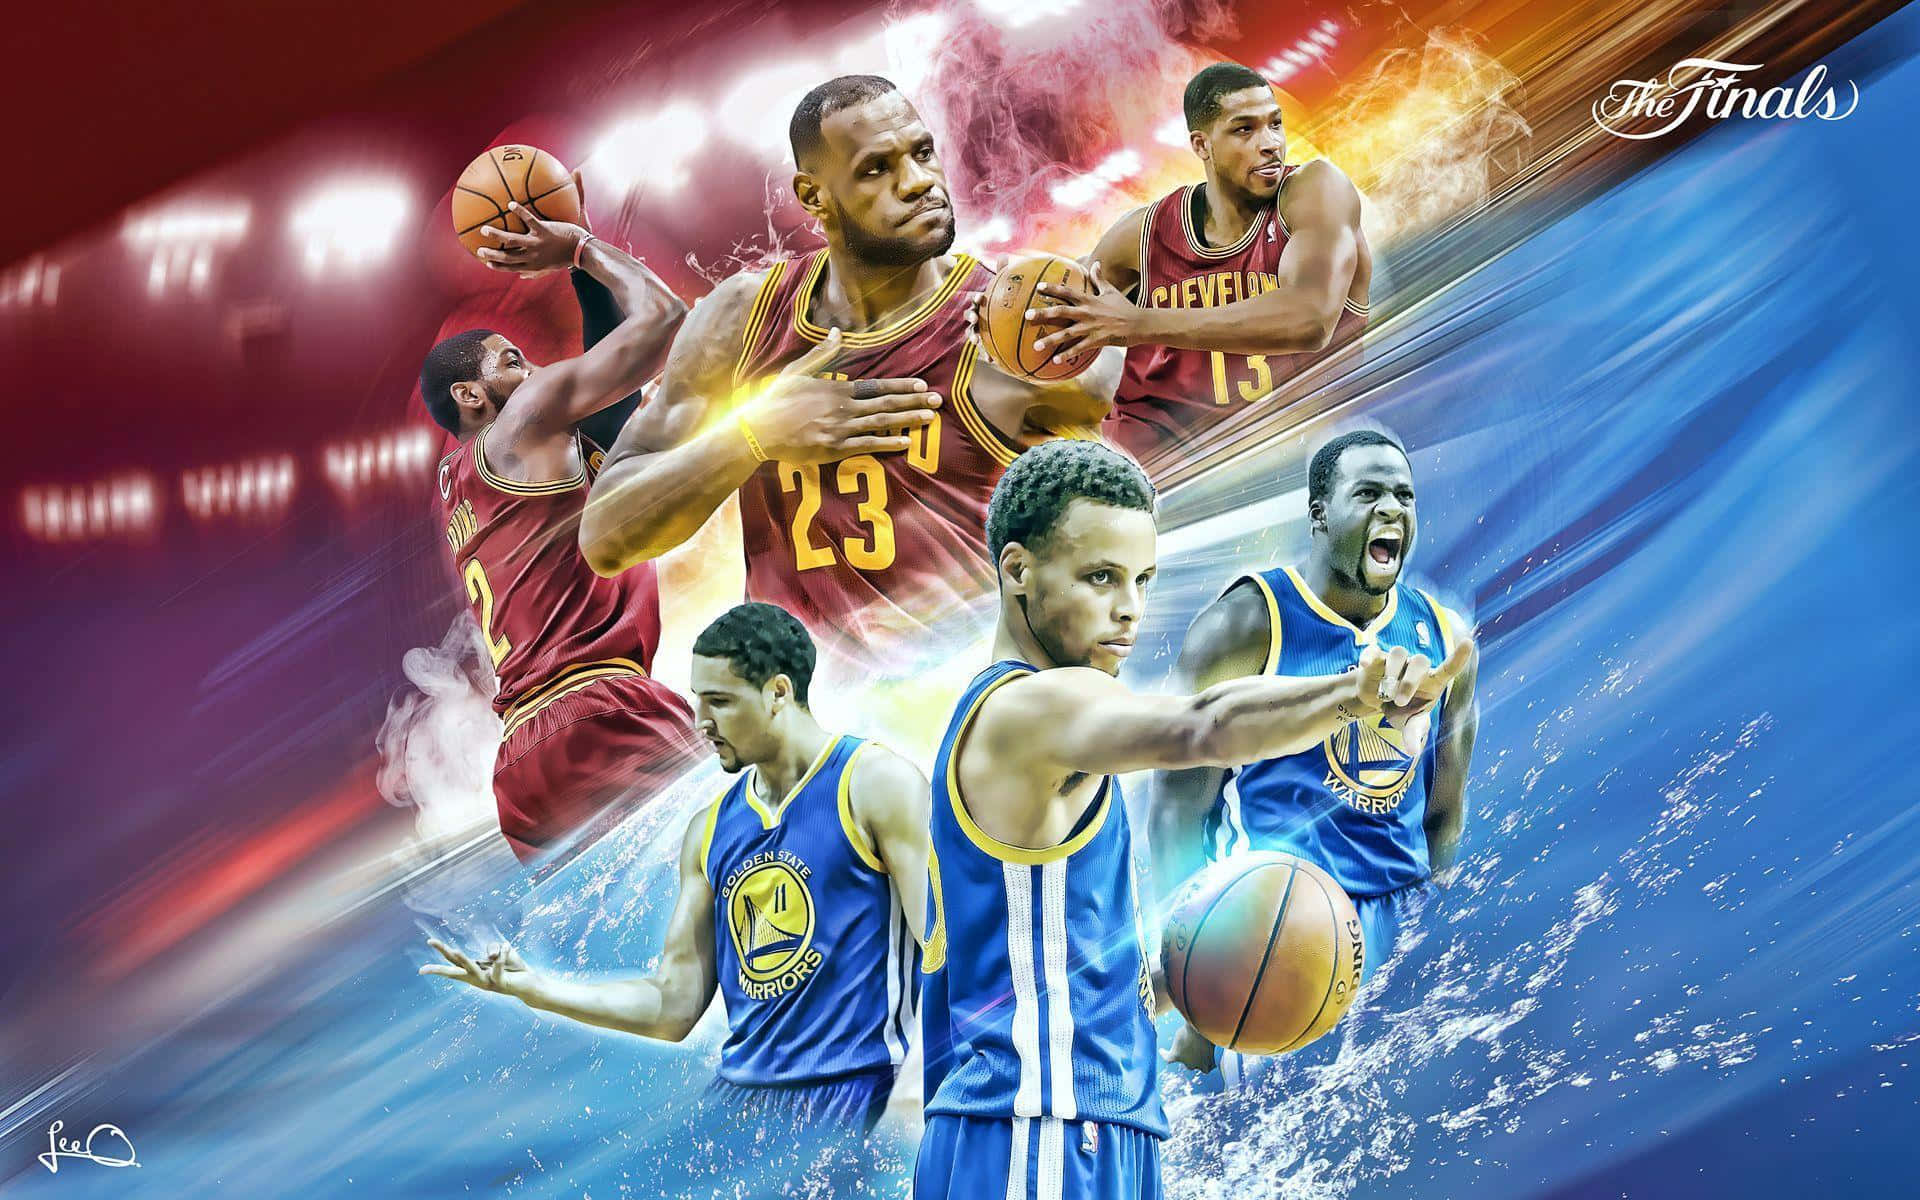 Experience the Best of Nba With The New Wallpaper. Wallpaper